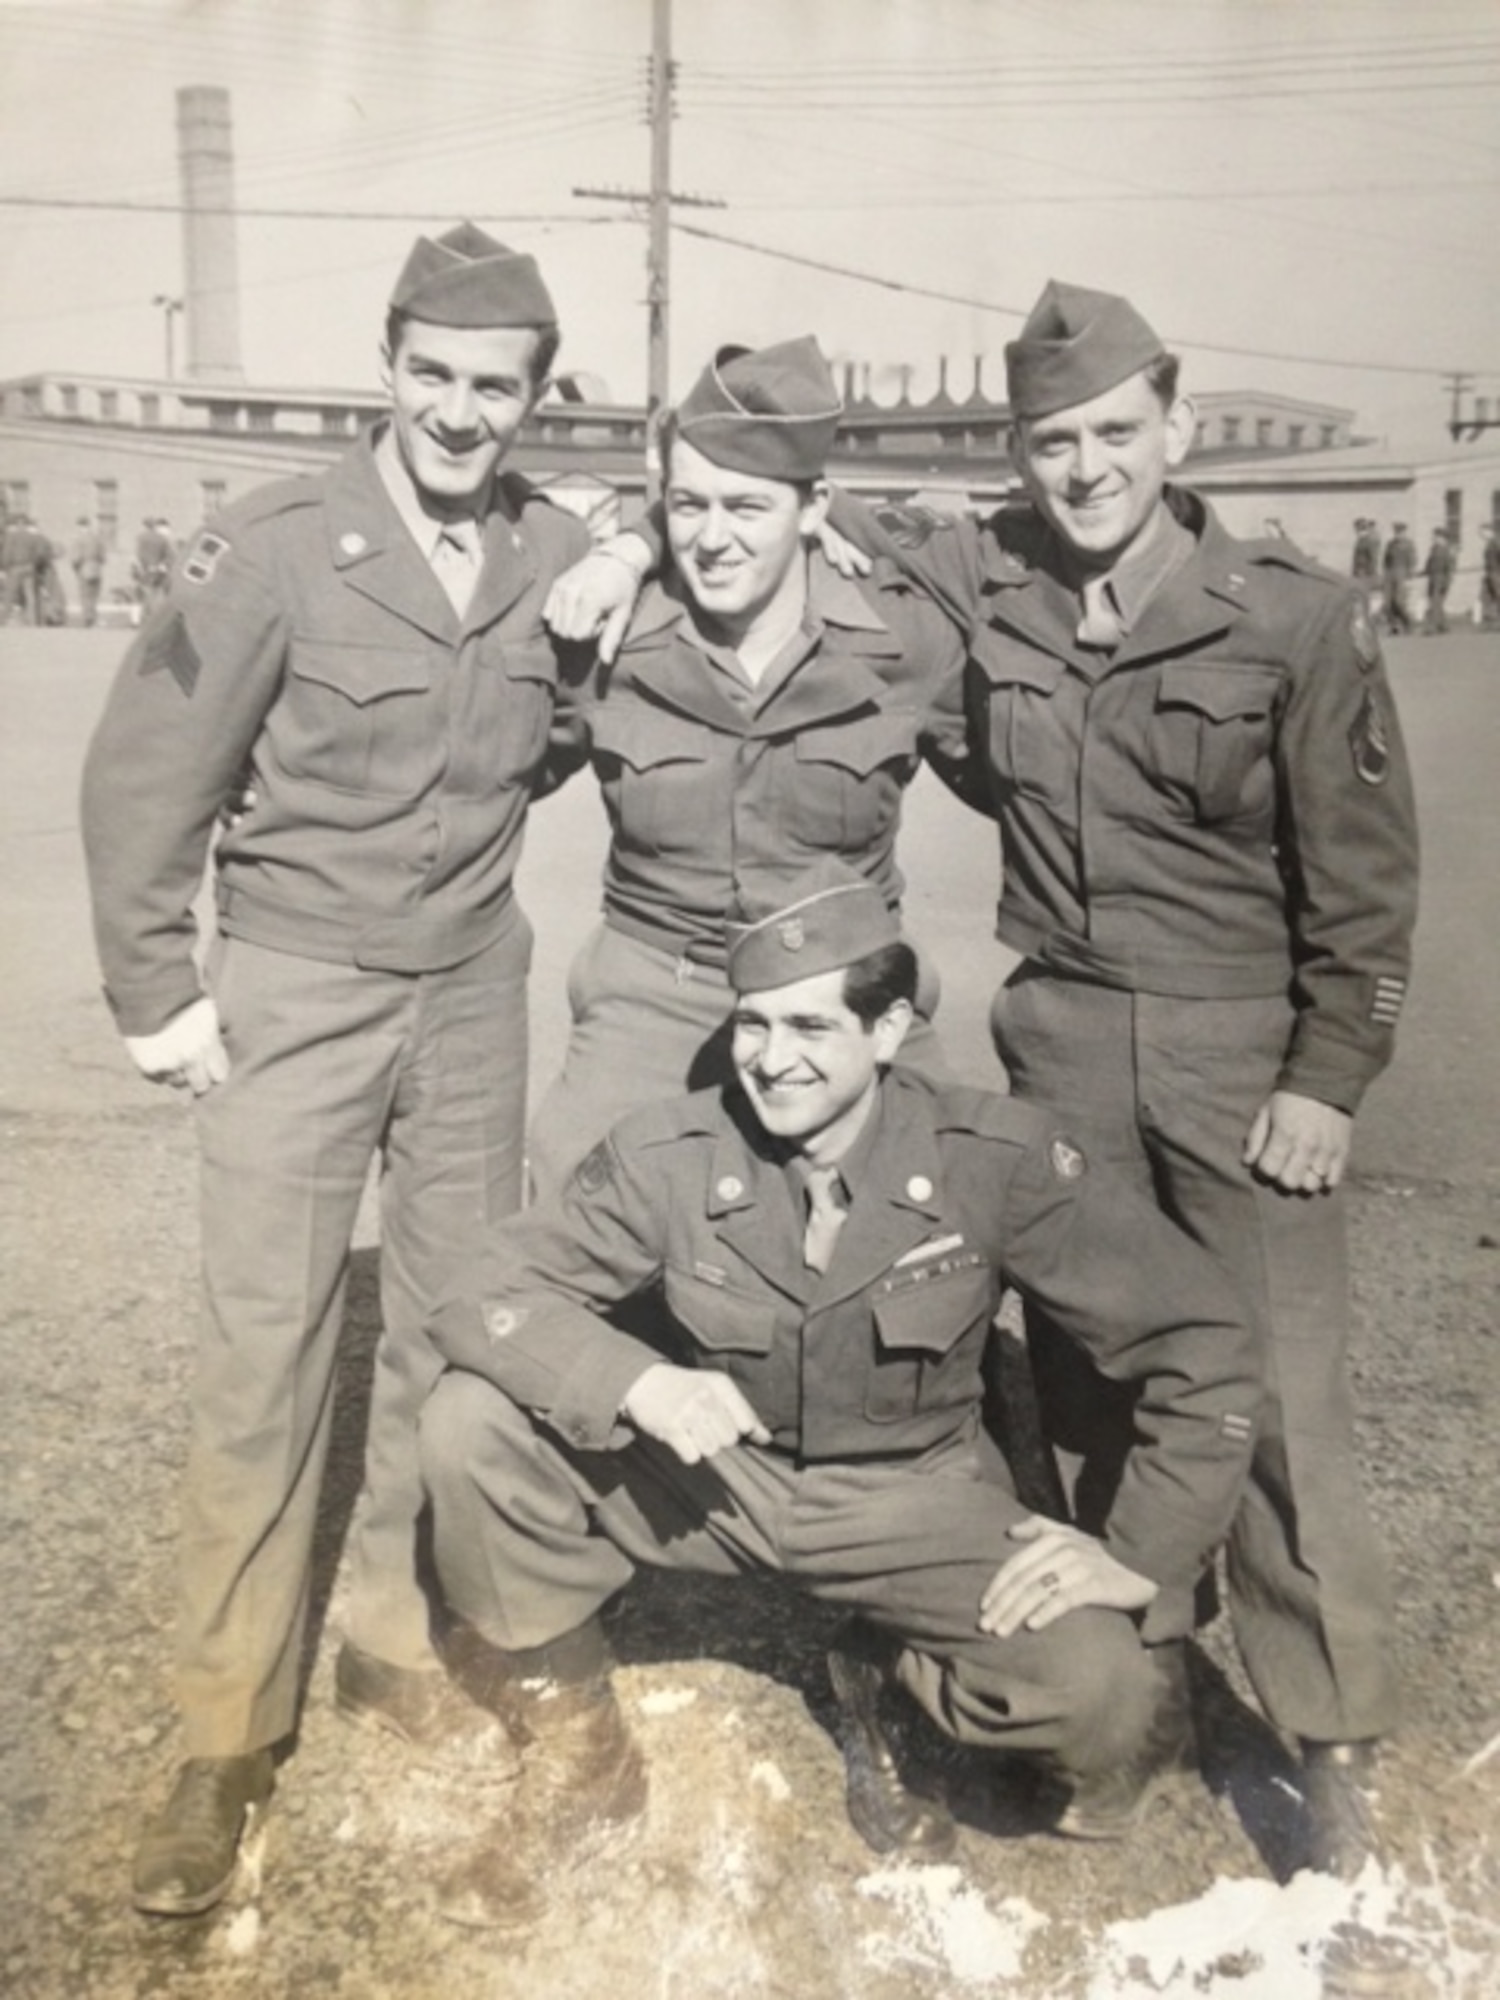 Sgt. Tom Boliaris, standing at left with unidentified fellow soldiers in 1946, served in the 371FG late in WWII, including when the group was based in Germany. (Courtesy Ms. Nancy Beaumier, daughter of 371FG veteran Cpl. Tom Boliaris)